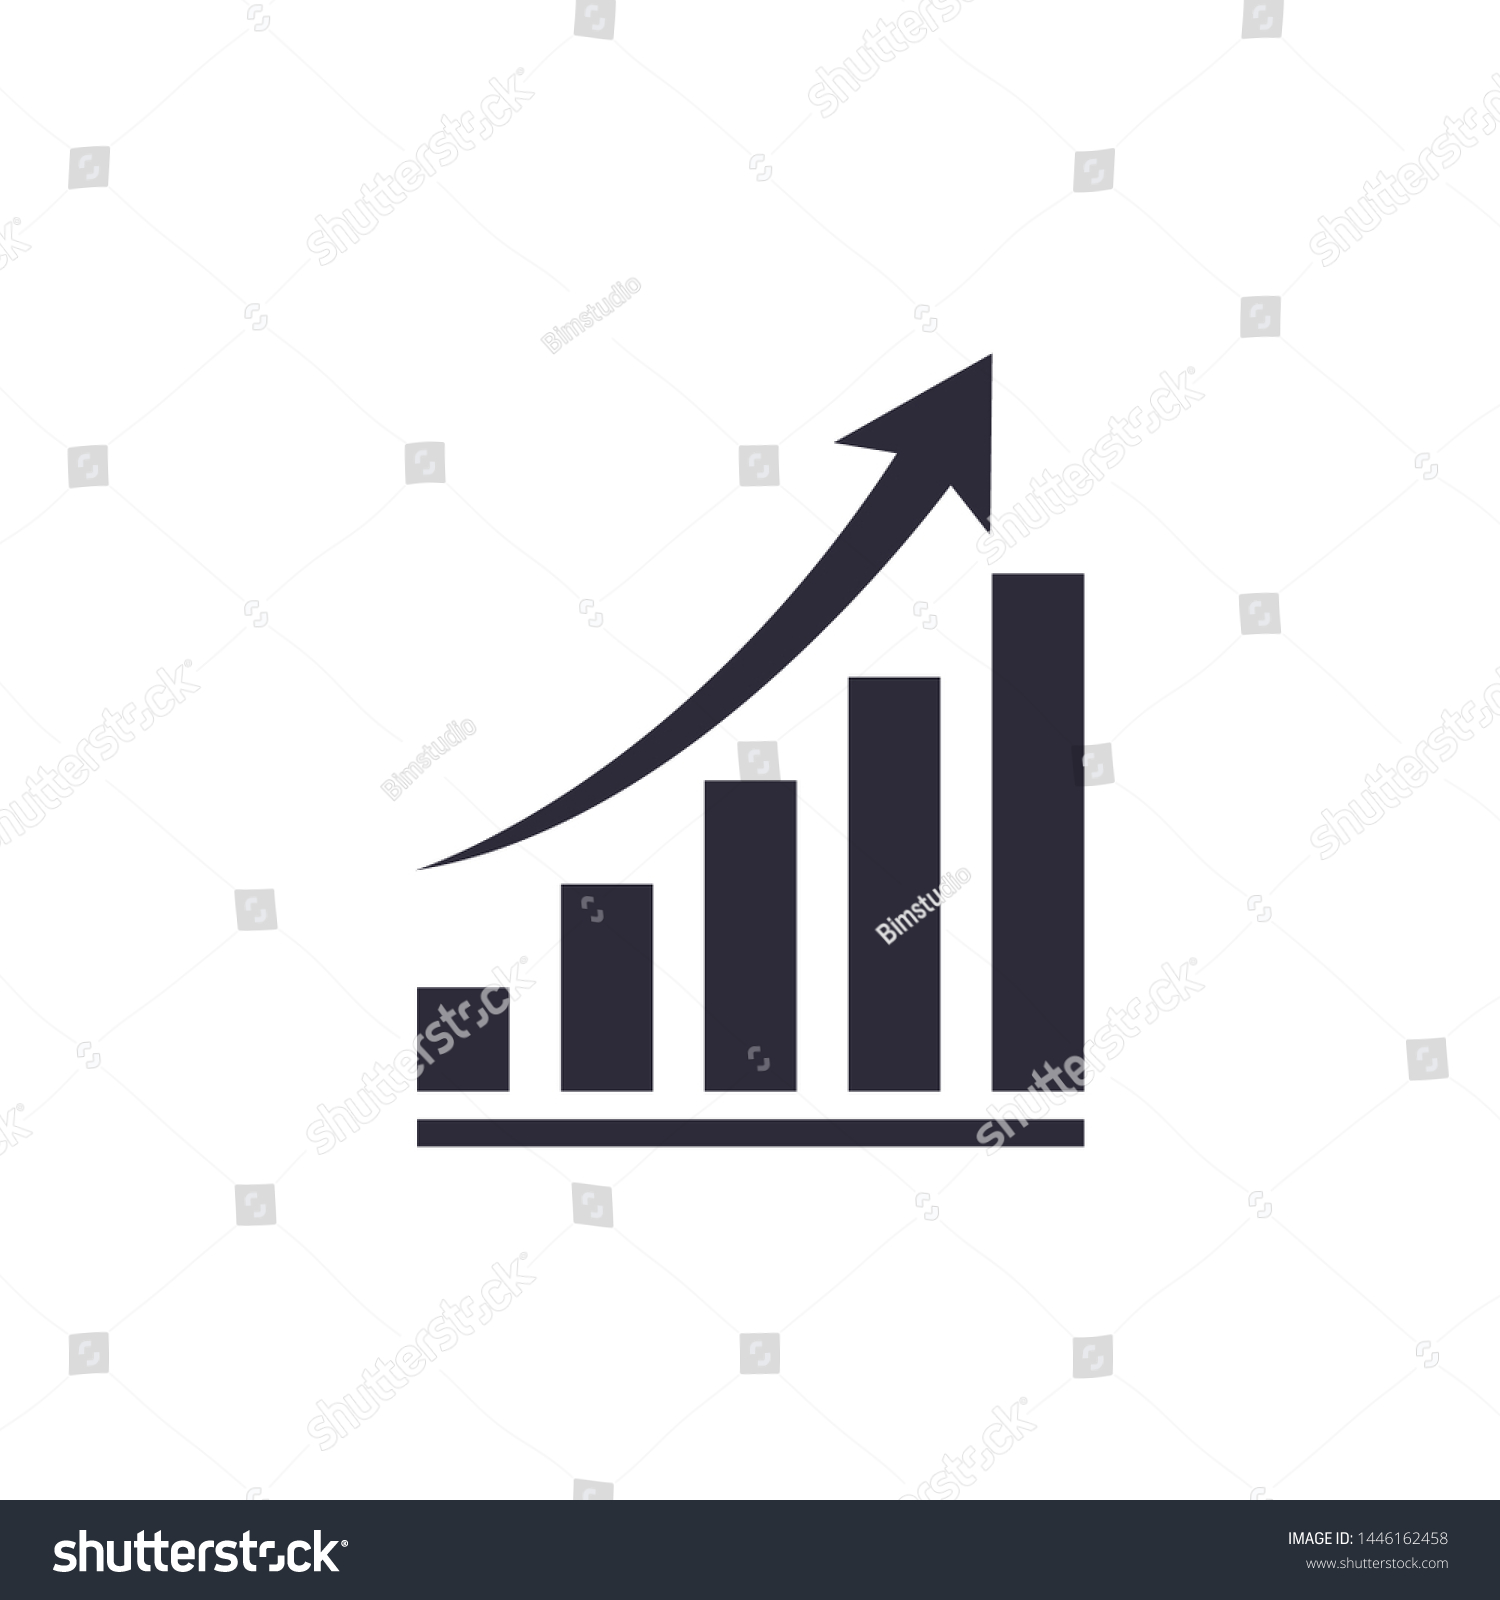 growing graph, bar chart, Flat icon isolated on the white background, flat design vector illustration. #1446162458